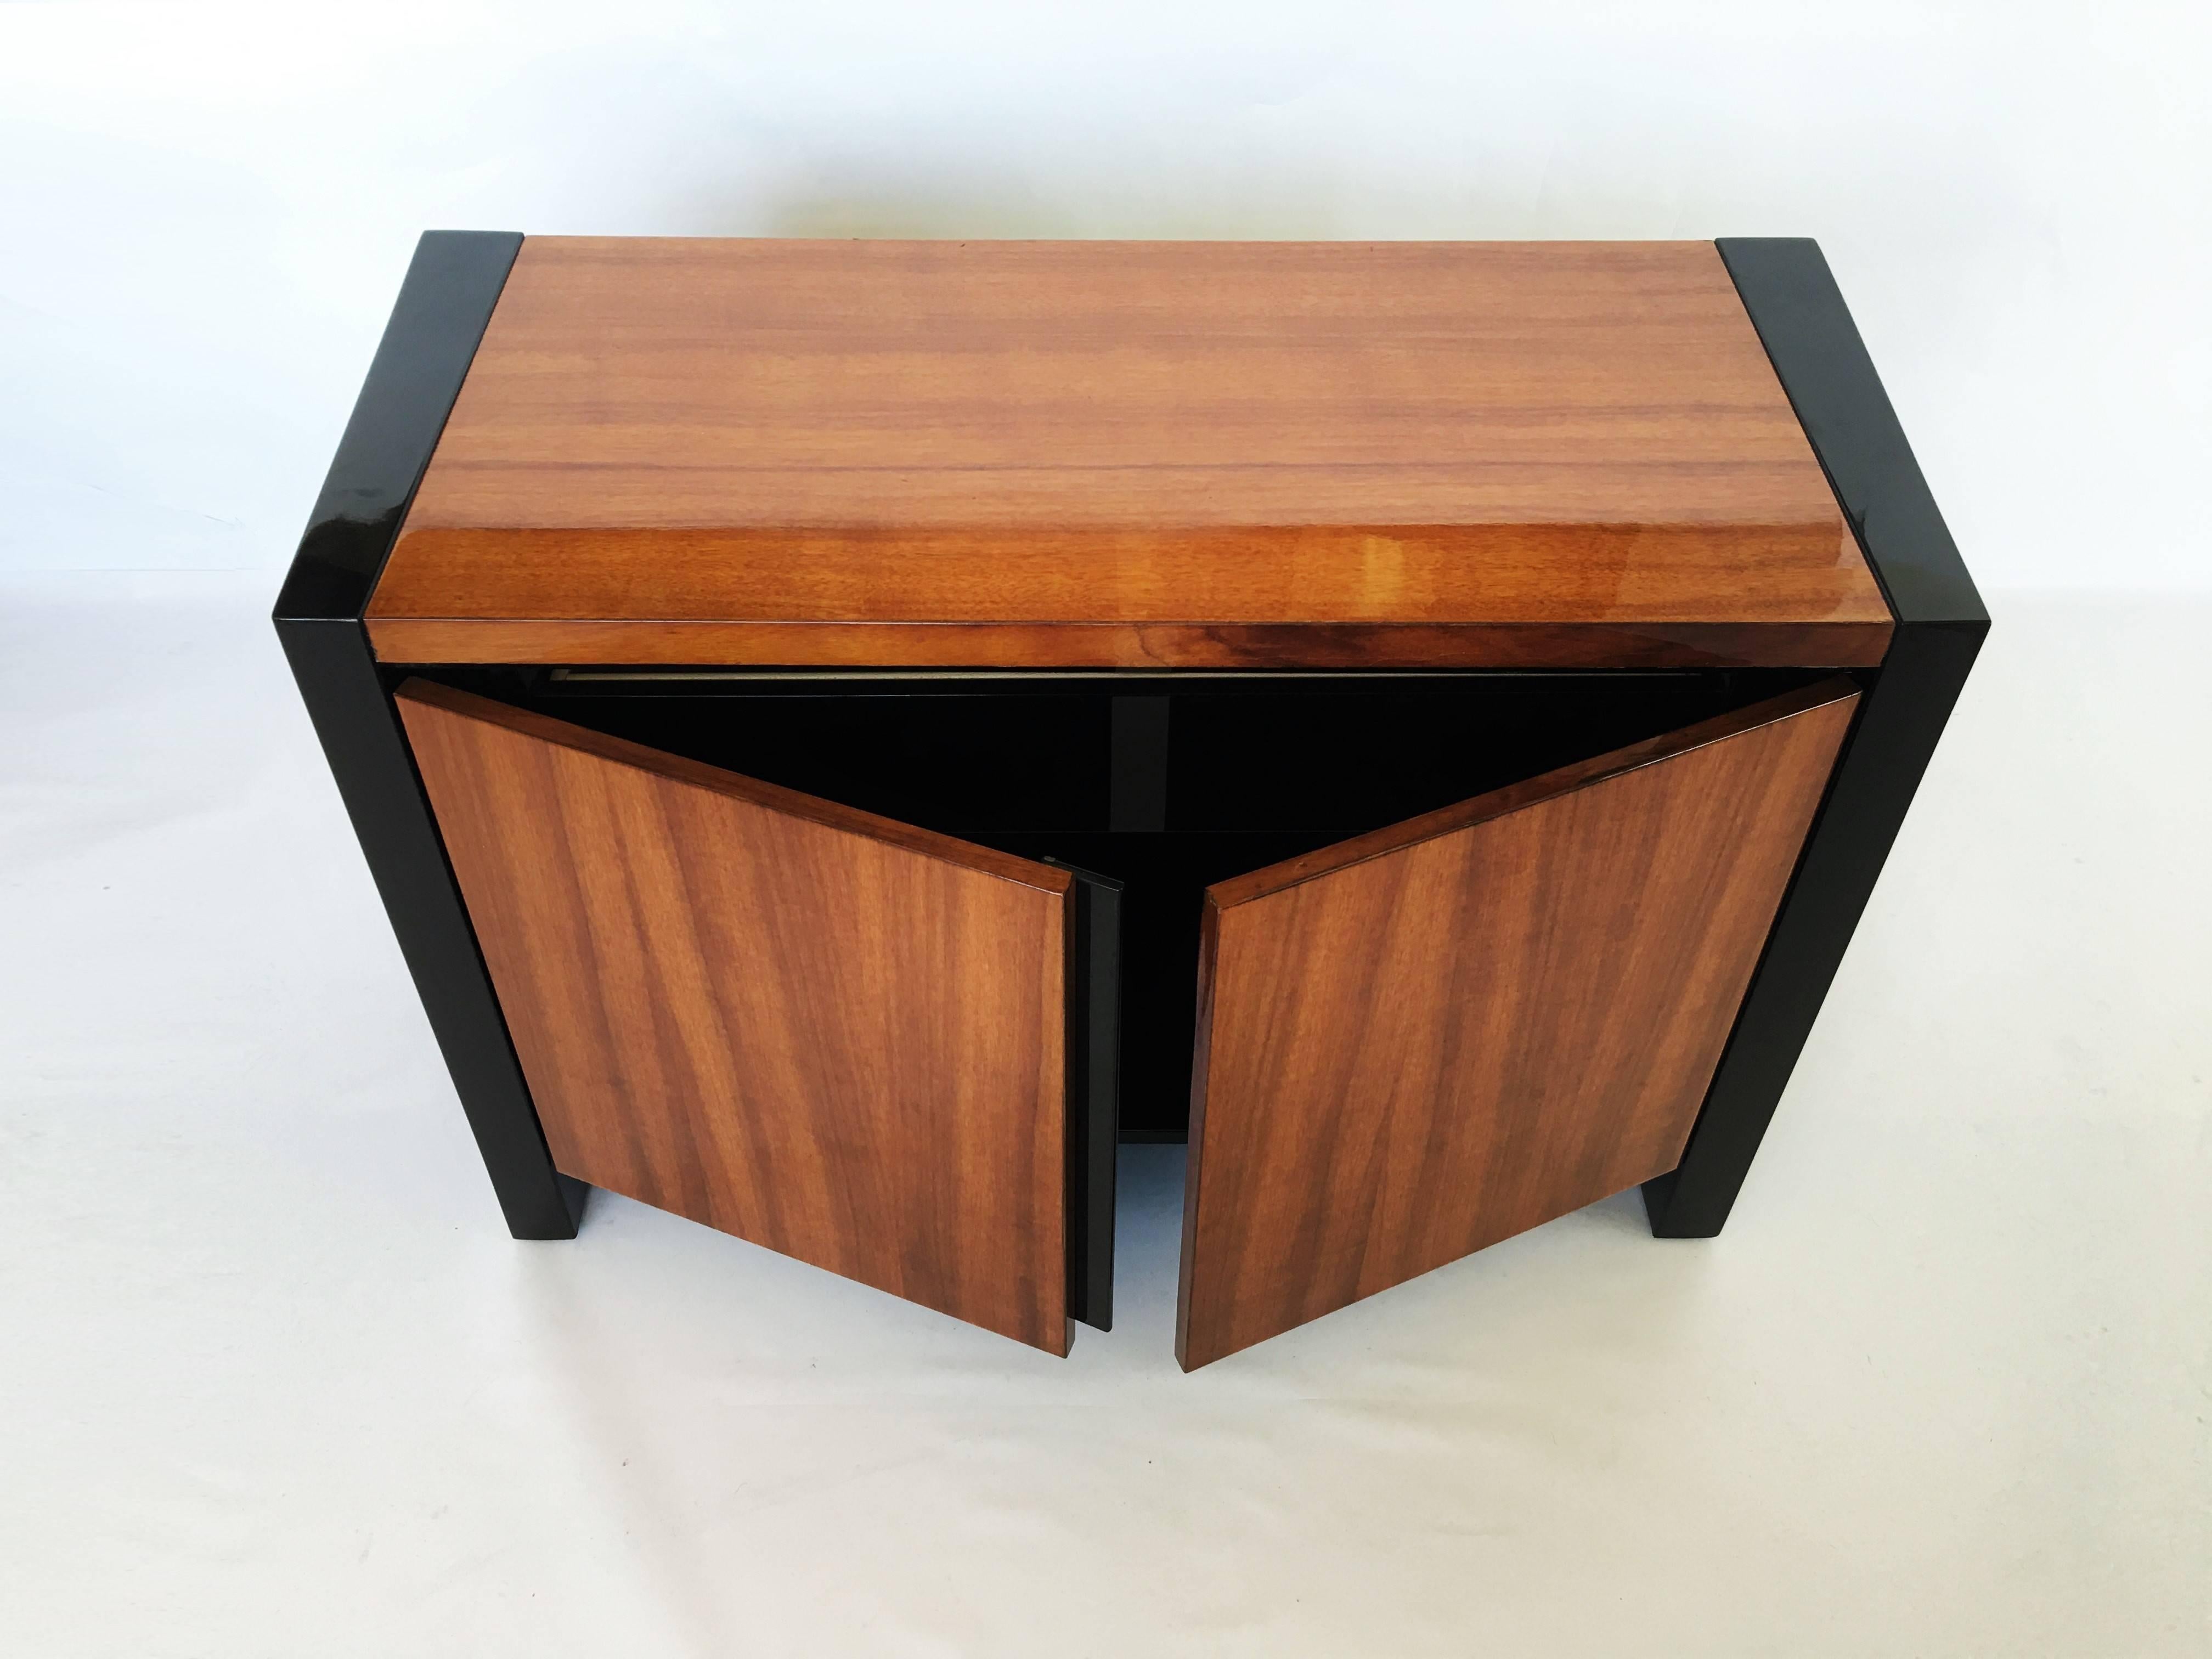 American Pair of Henredon Koa Wood and Black Lacquer Nightstands or Side Tables